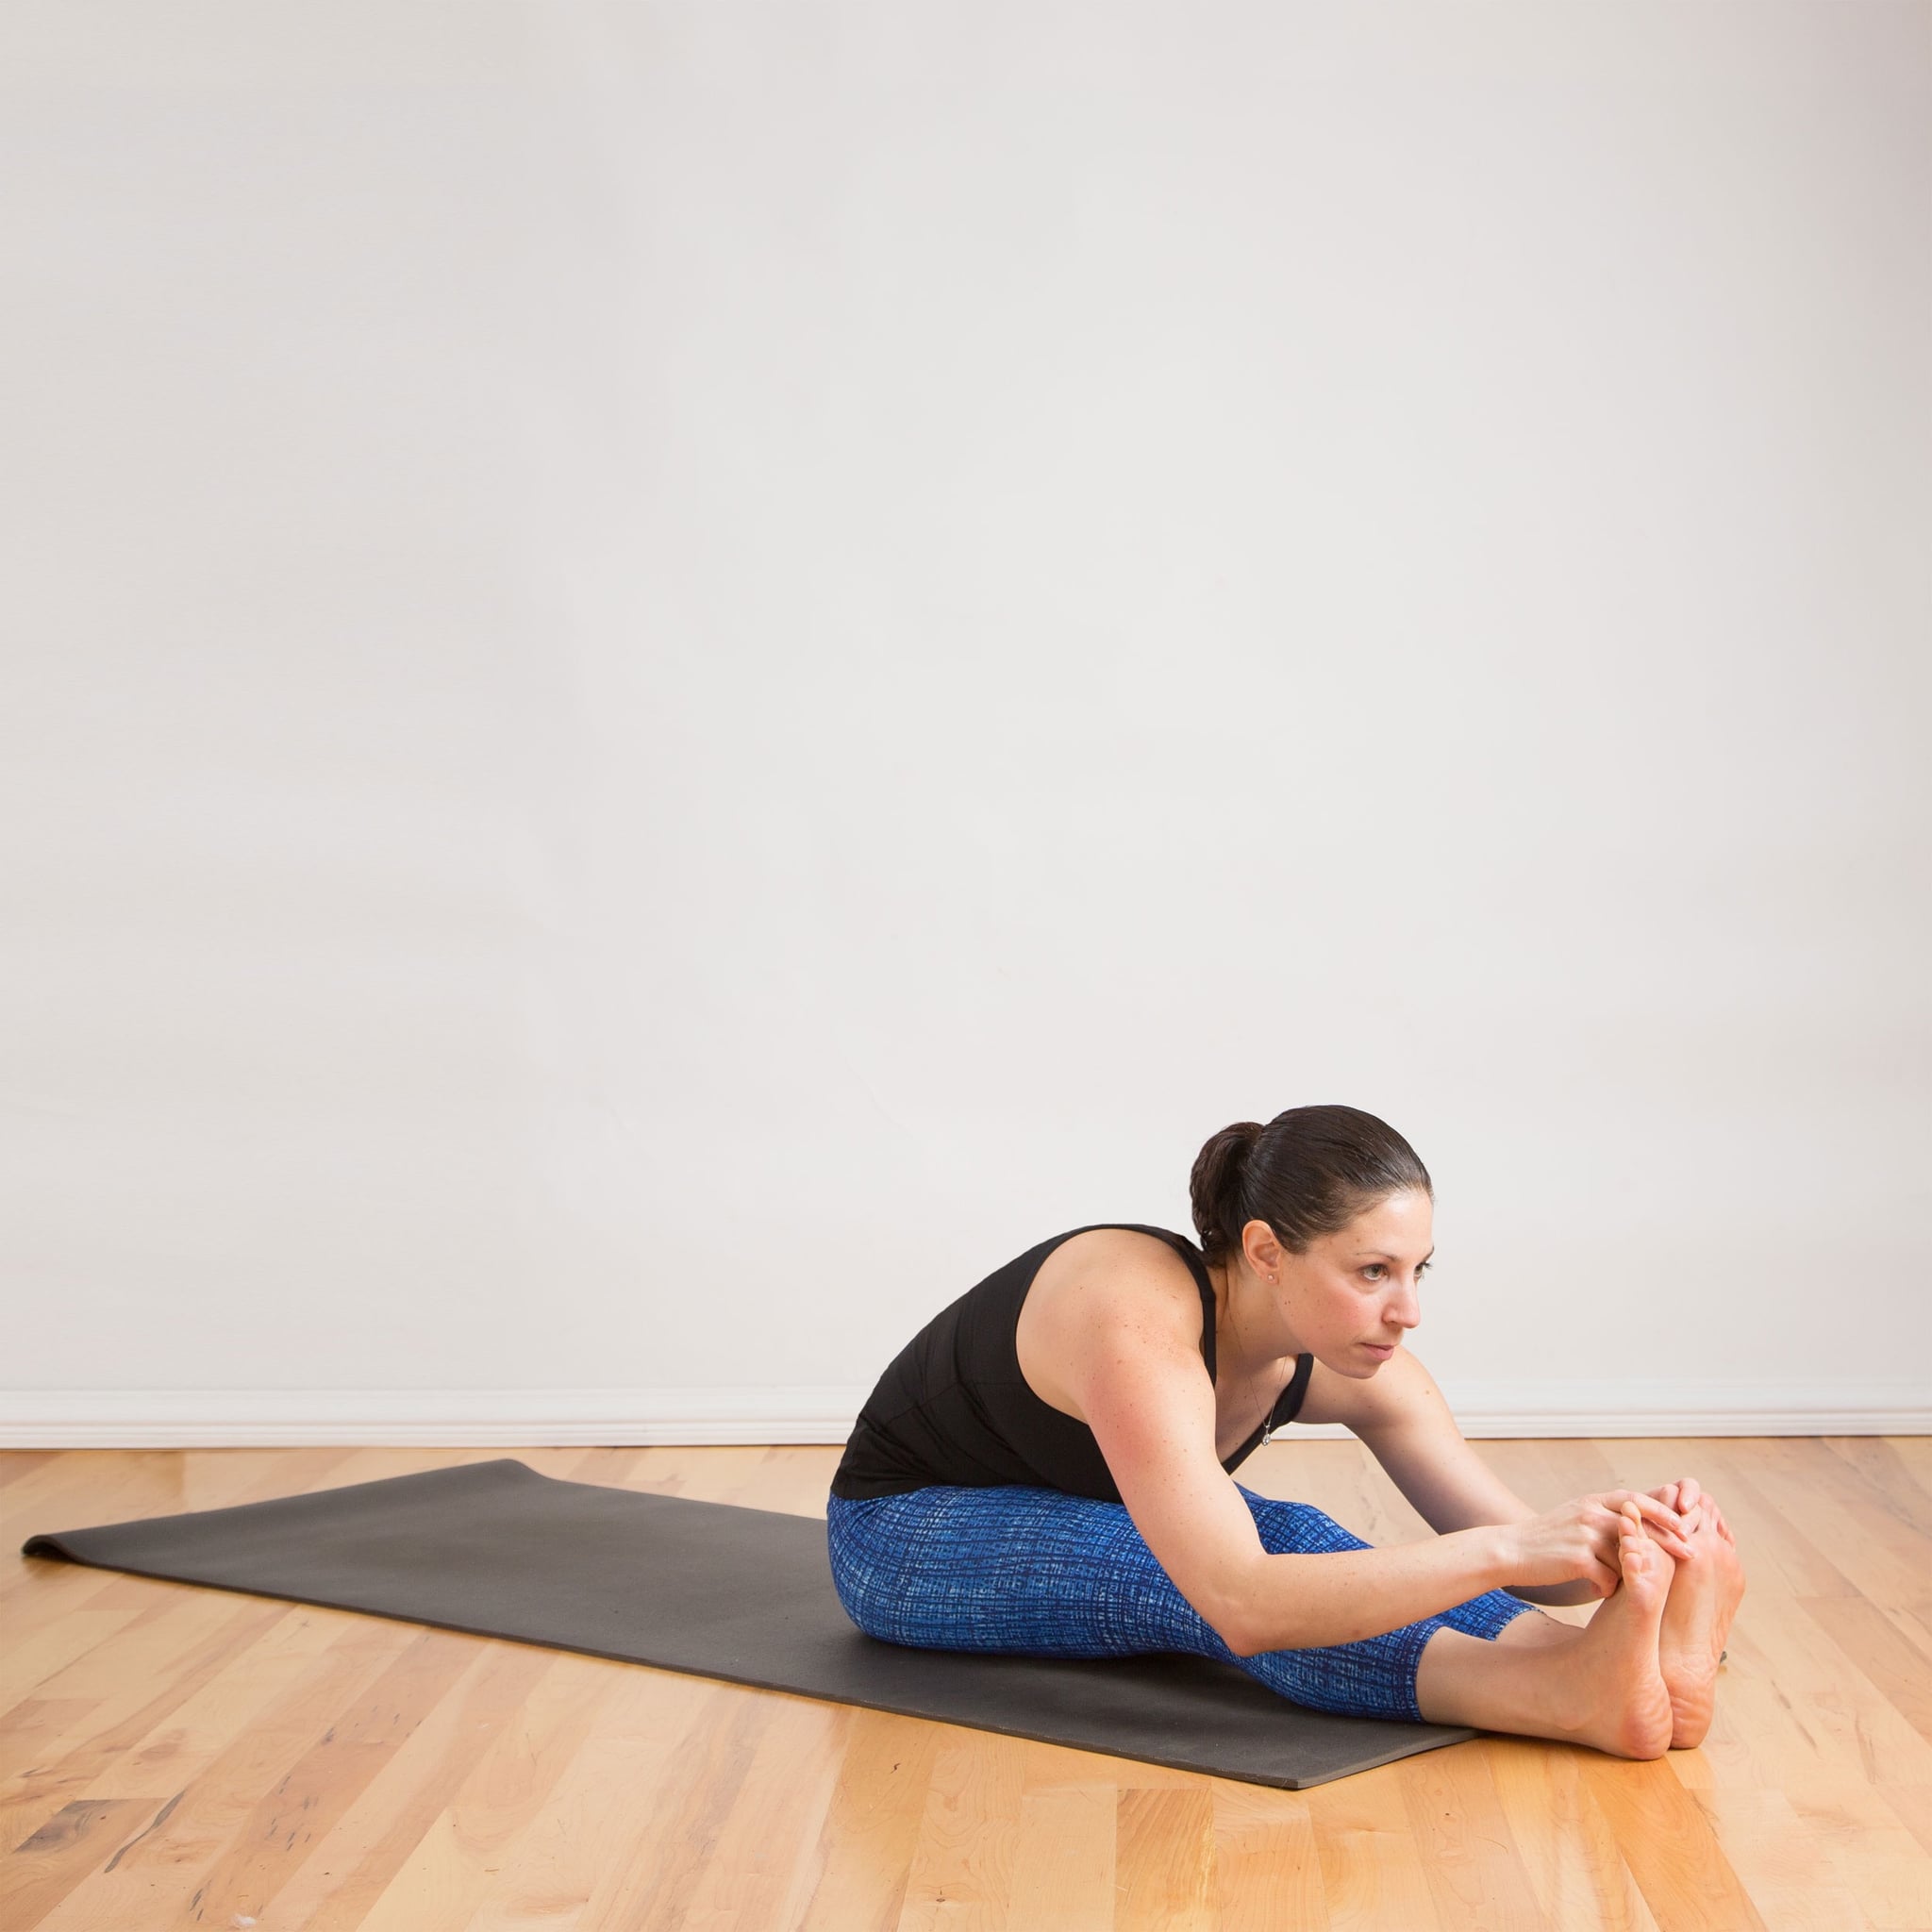 Tips For a Deeper Seated Forward Bend | POPSUGAR Fitness